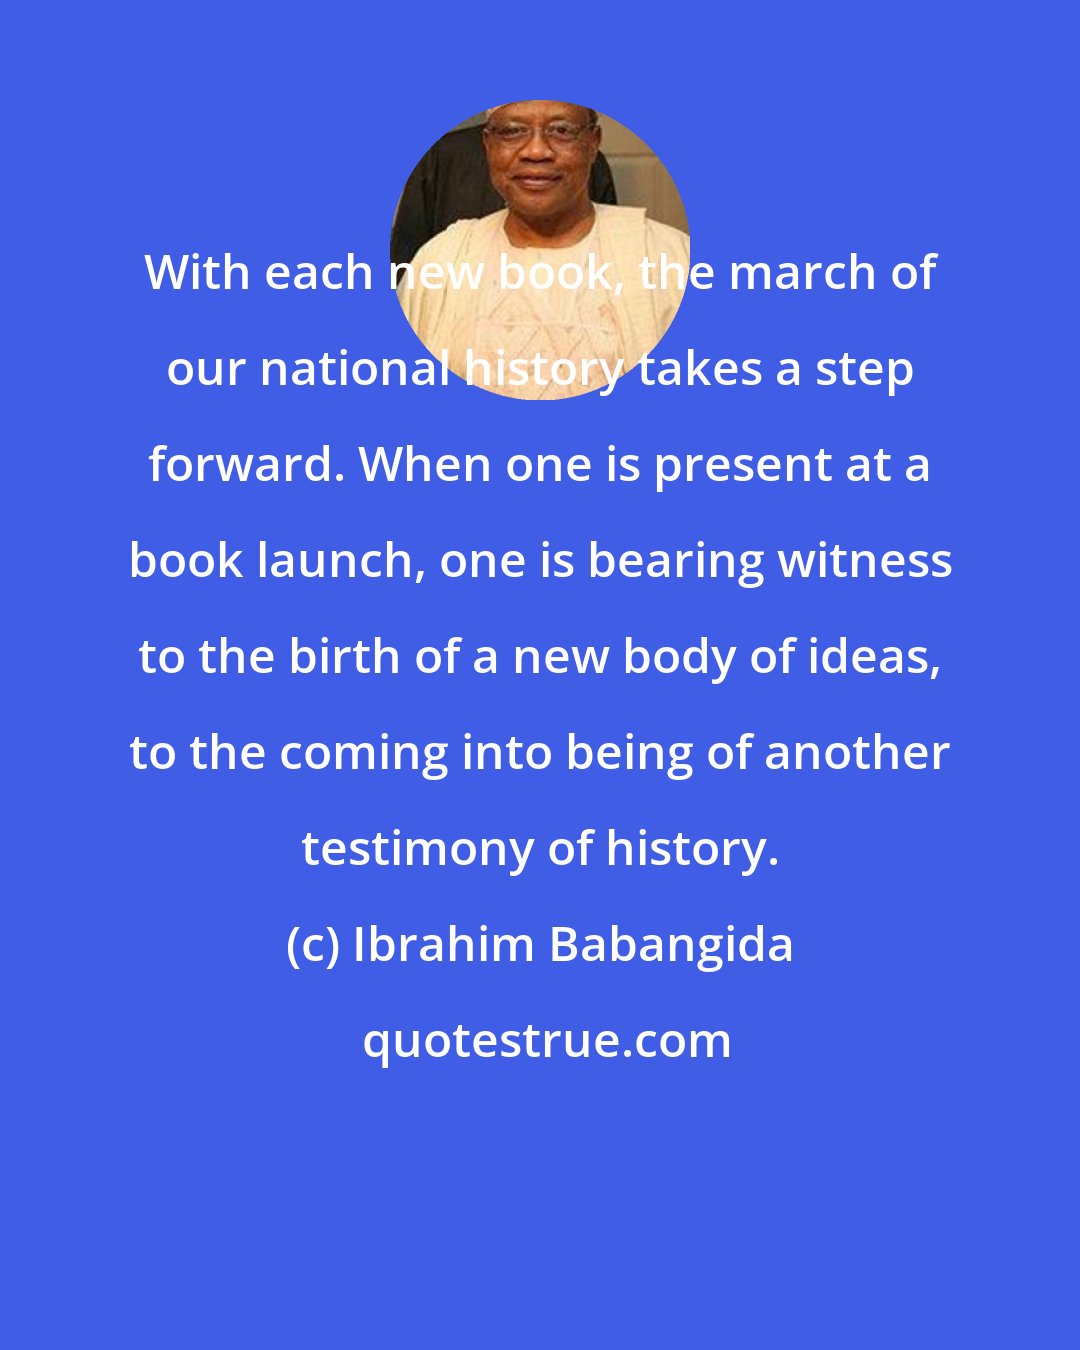 Ibrahim Babangida: With each new book, the march of our national history takes a step forward. When one is present at a book launch, one is bearing witness to the birth of a new body of ideas, to the coming into being of another testimony of history.